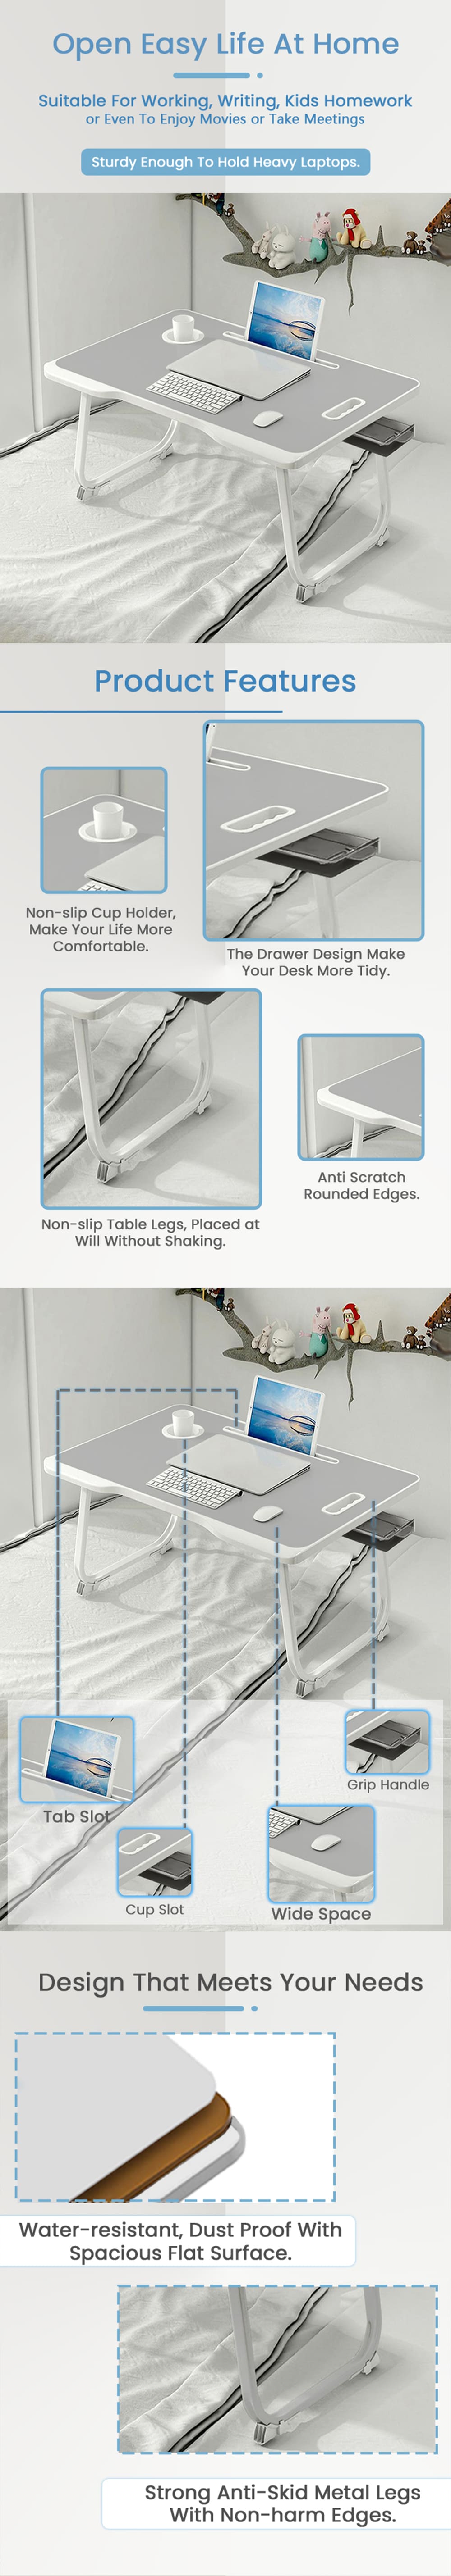 Buddy Stand Bed Table